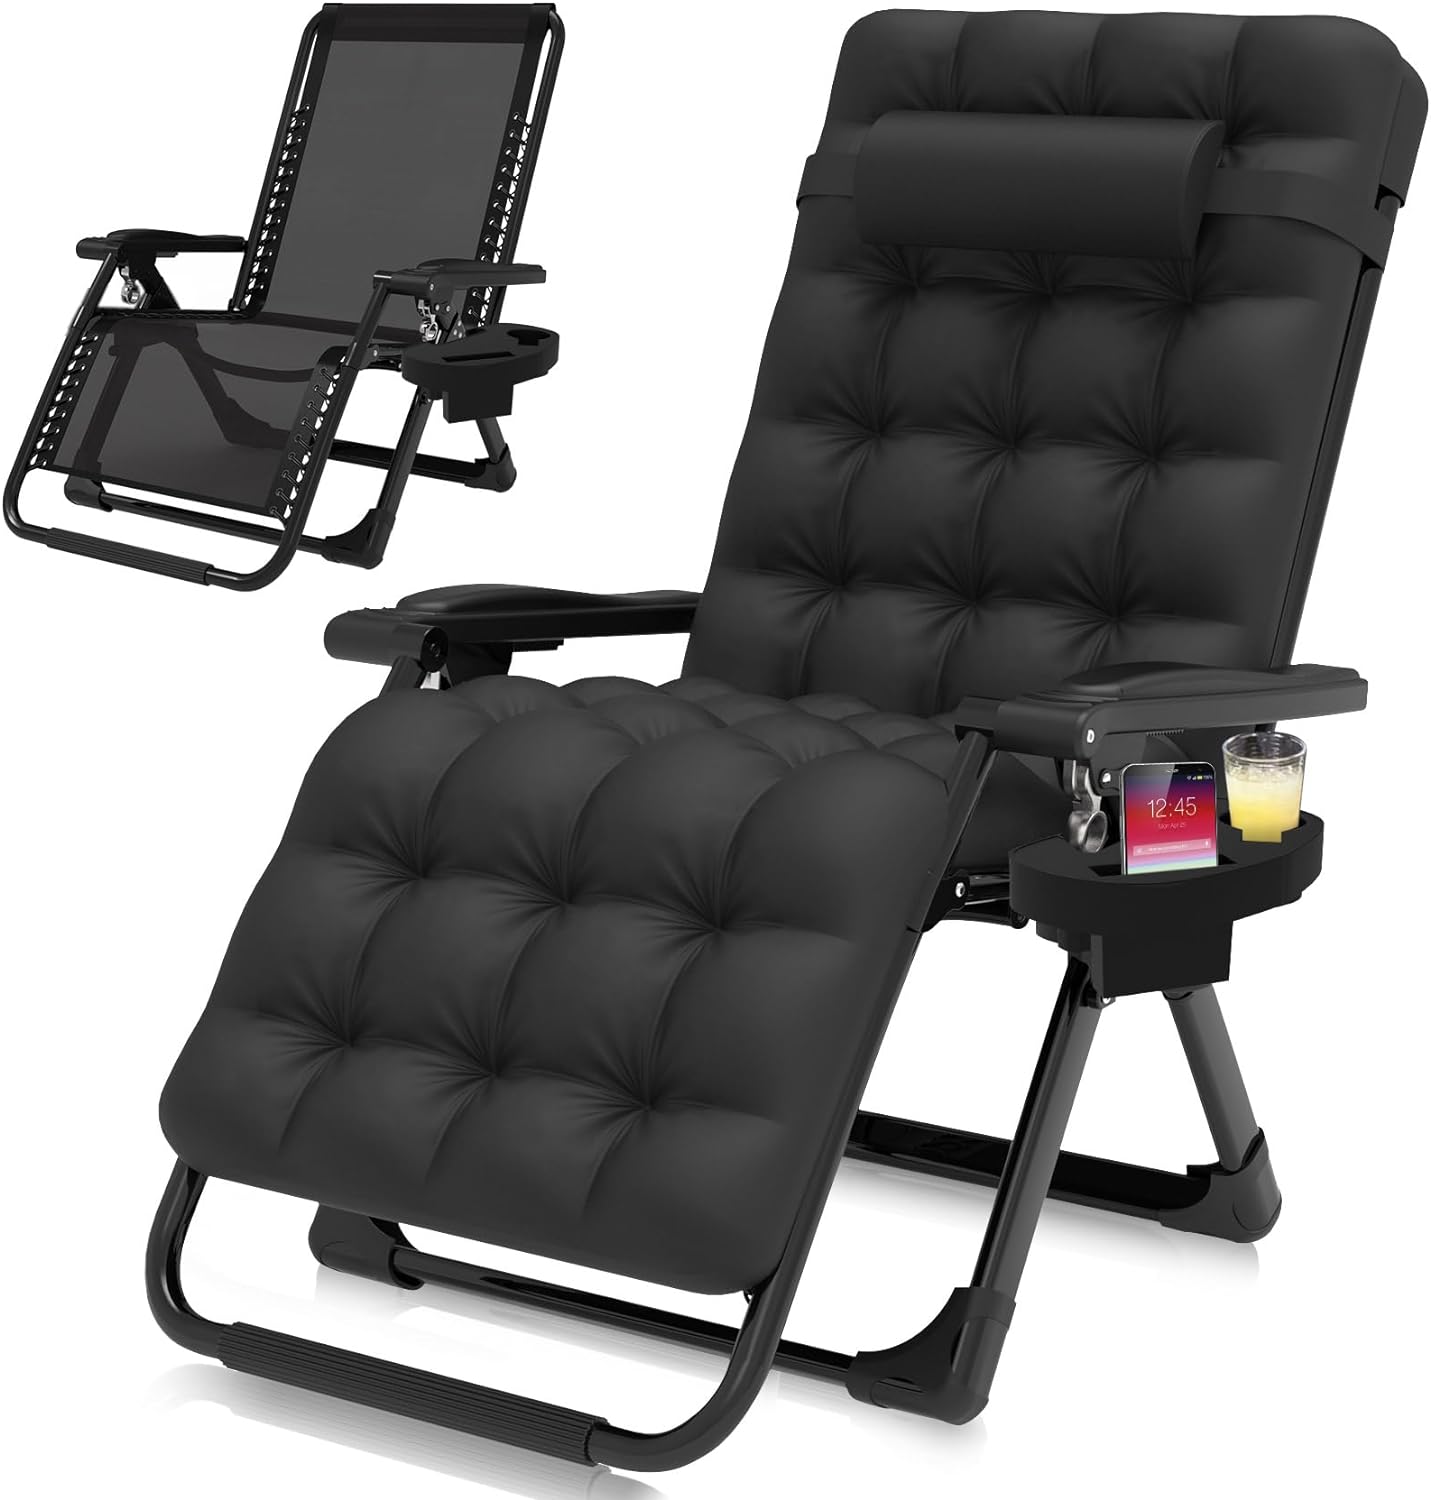 Suteck Zero Gravity Chair, Reclining Camping Lounge Chair w/Removable Cushion